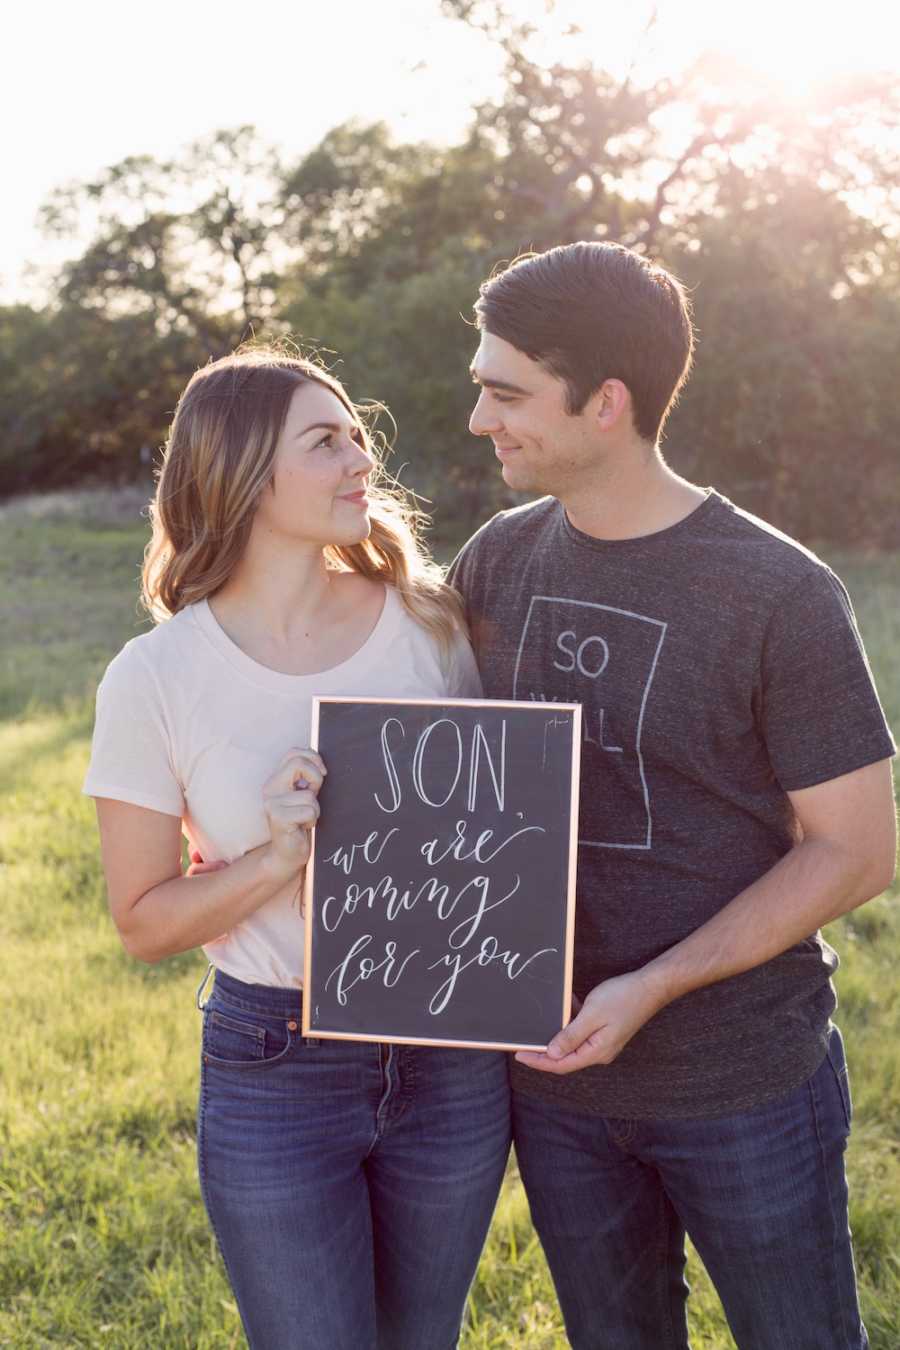 Husband and wife who are going to adopt hold sign saying, "son we are coming for you"